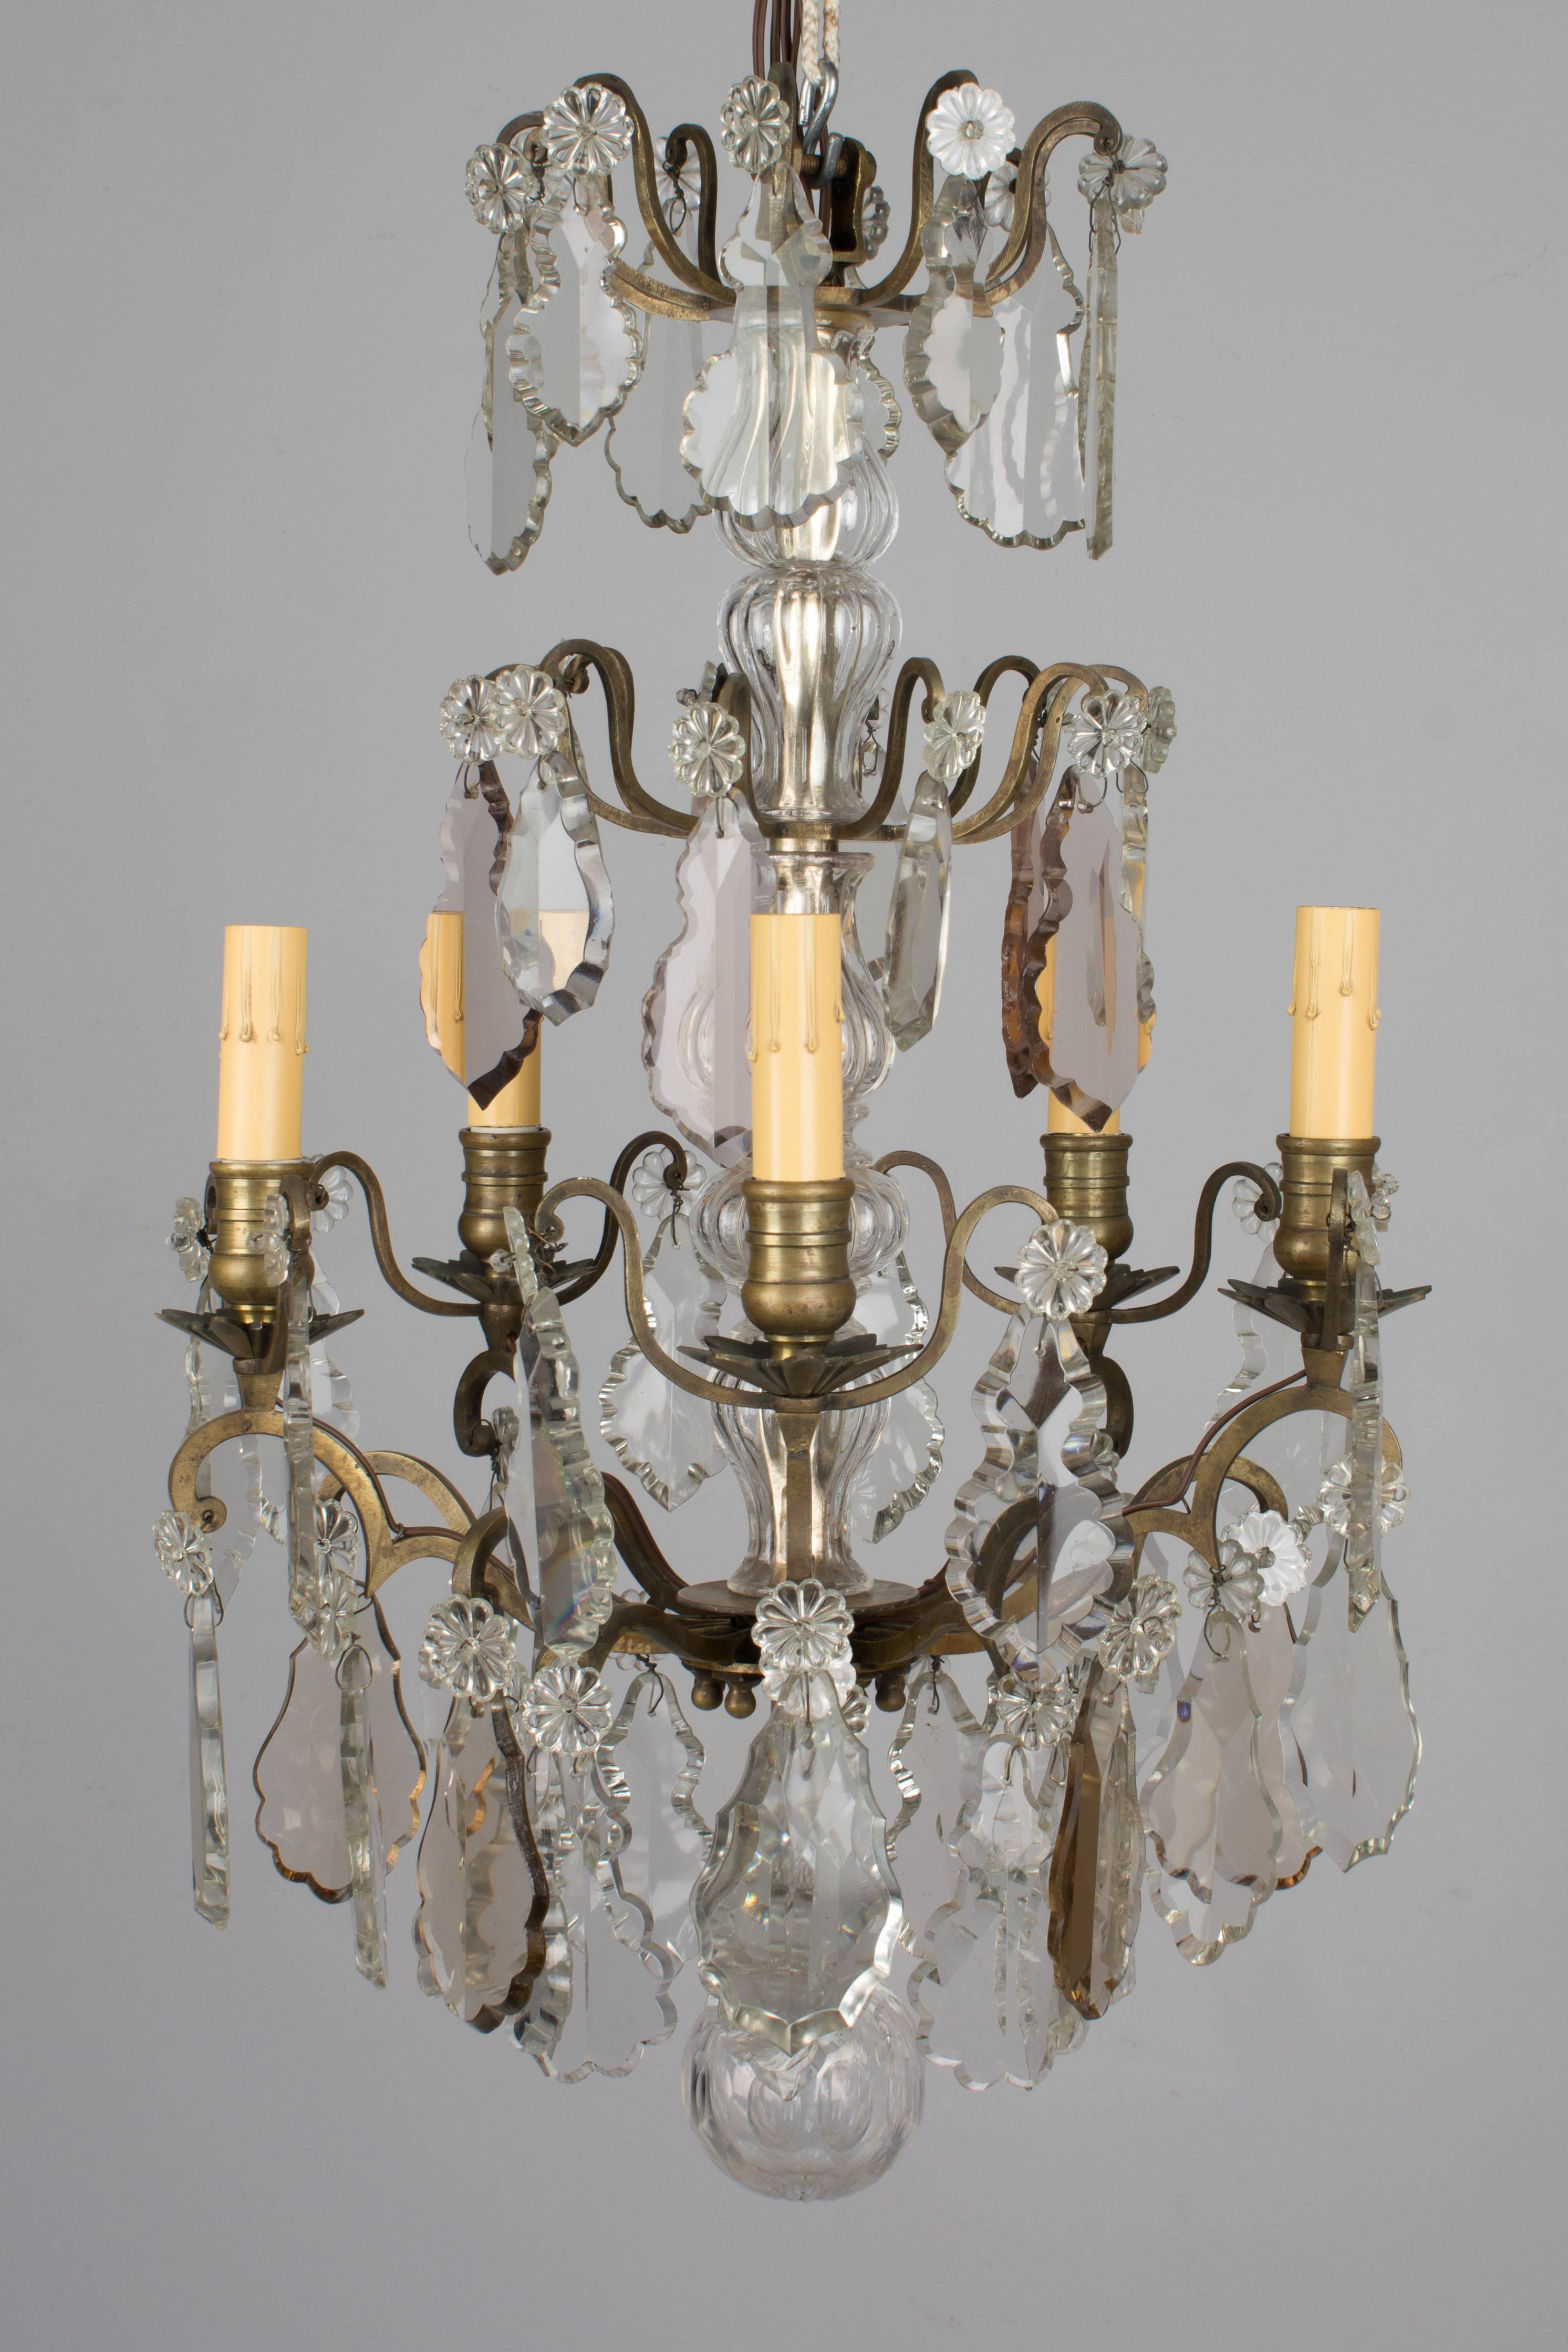 A small French Louis XV style five-light chandelier with an assortment of clear and amber crystal prisms, columns and rosettes. Brass frame. Rewired with new sockets and candle covers. There is no chain or canopy and a ground wire will need to be